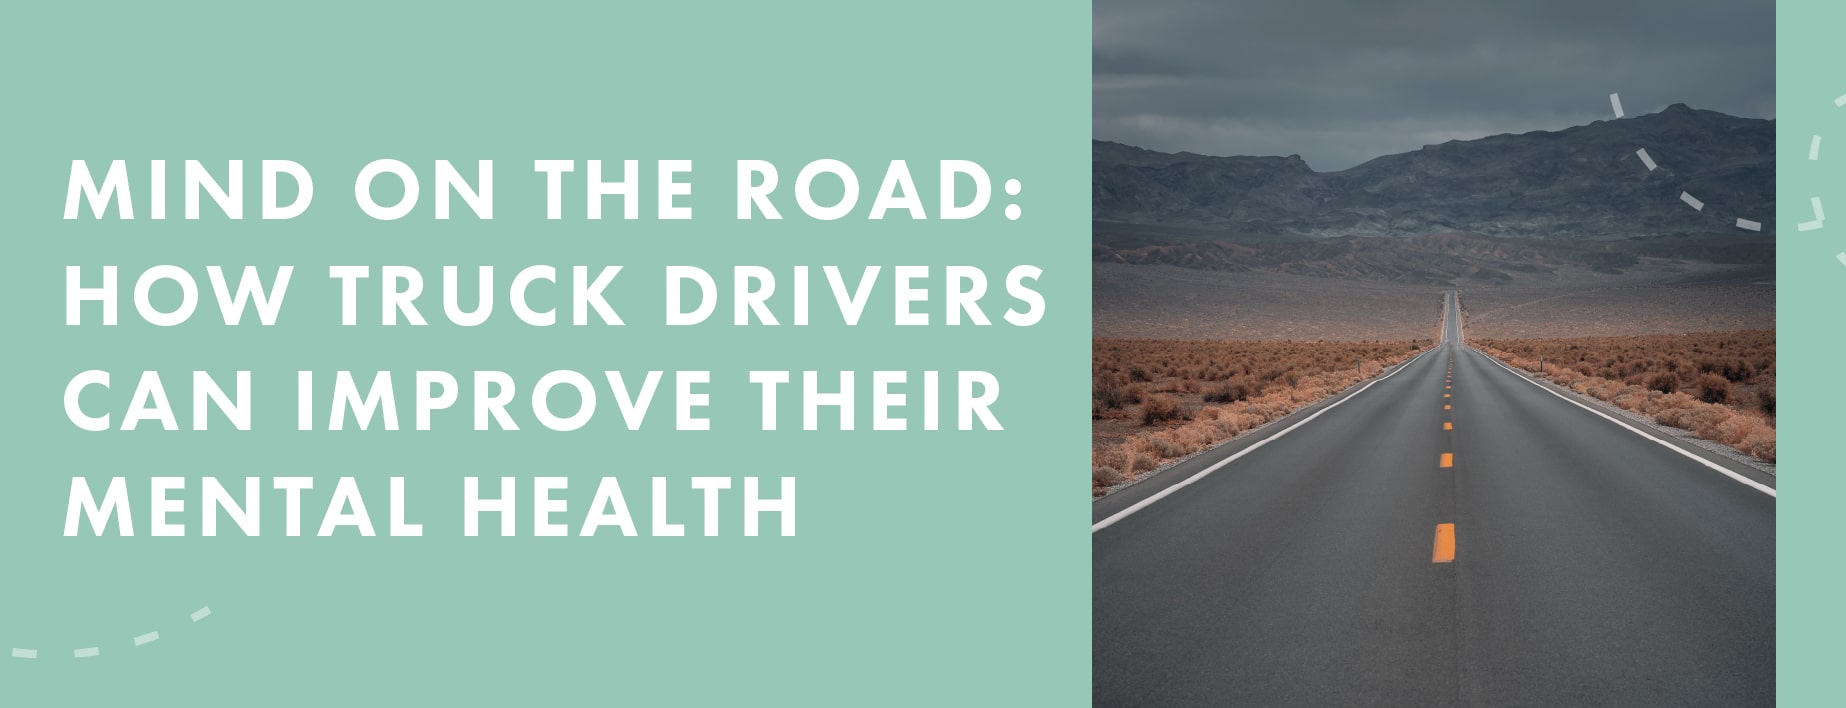 Mind on the Road: How Truck Drivers Can Improve Their Mental Health